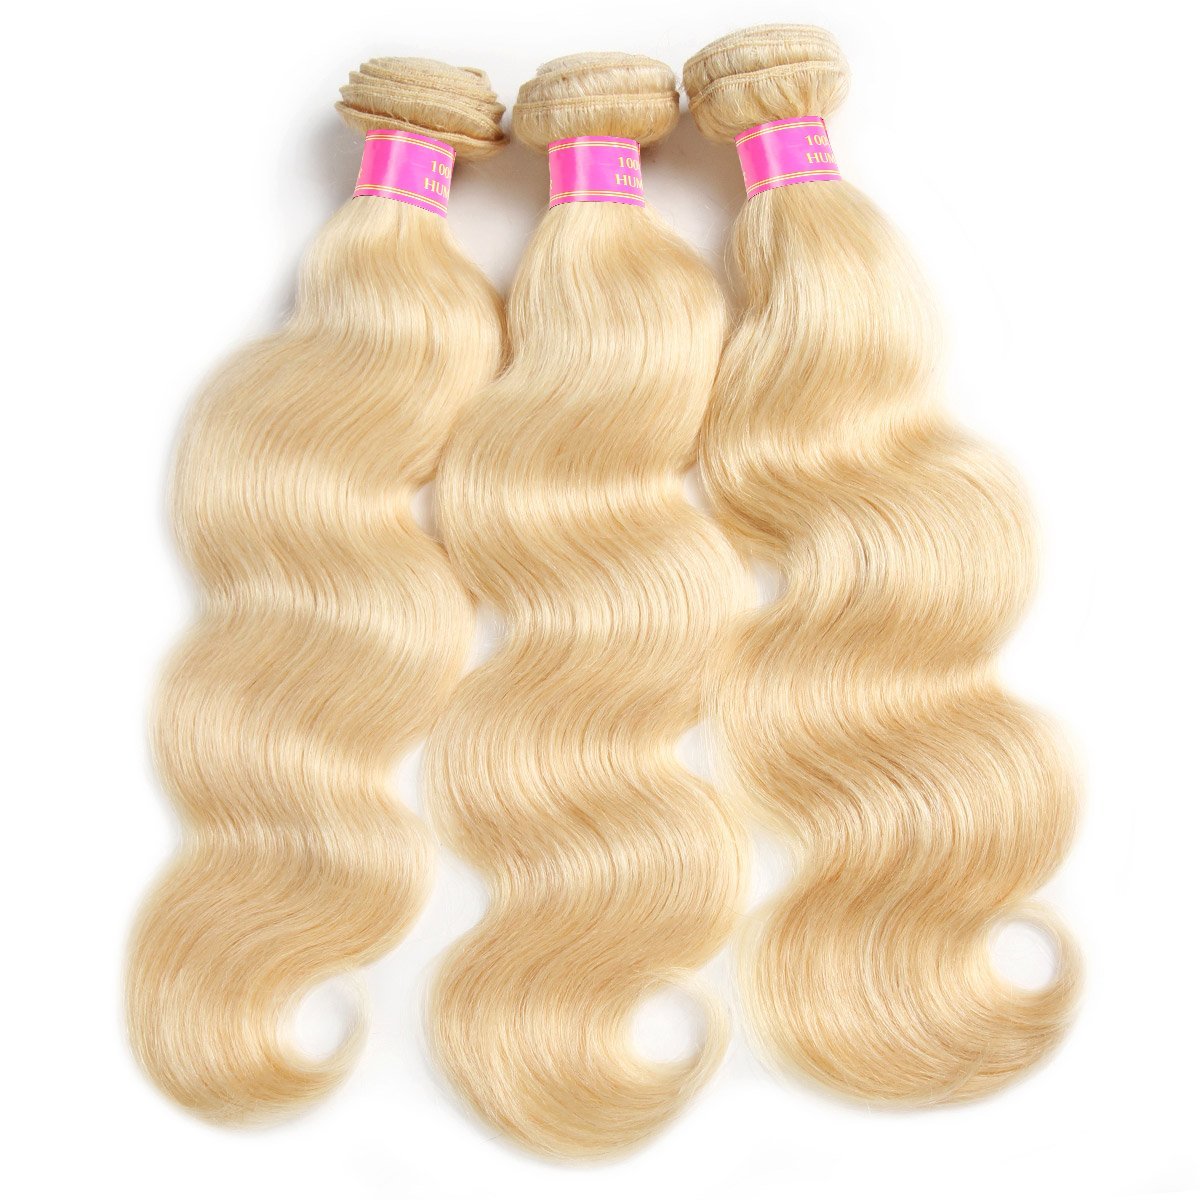 613 Blonde Color Body Wave Hair 3 Bundles with 13x4 Lace Frontal - MeetuHair